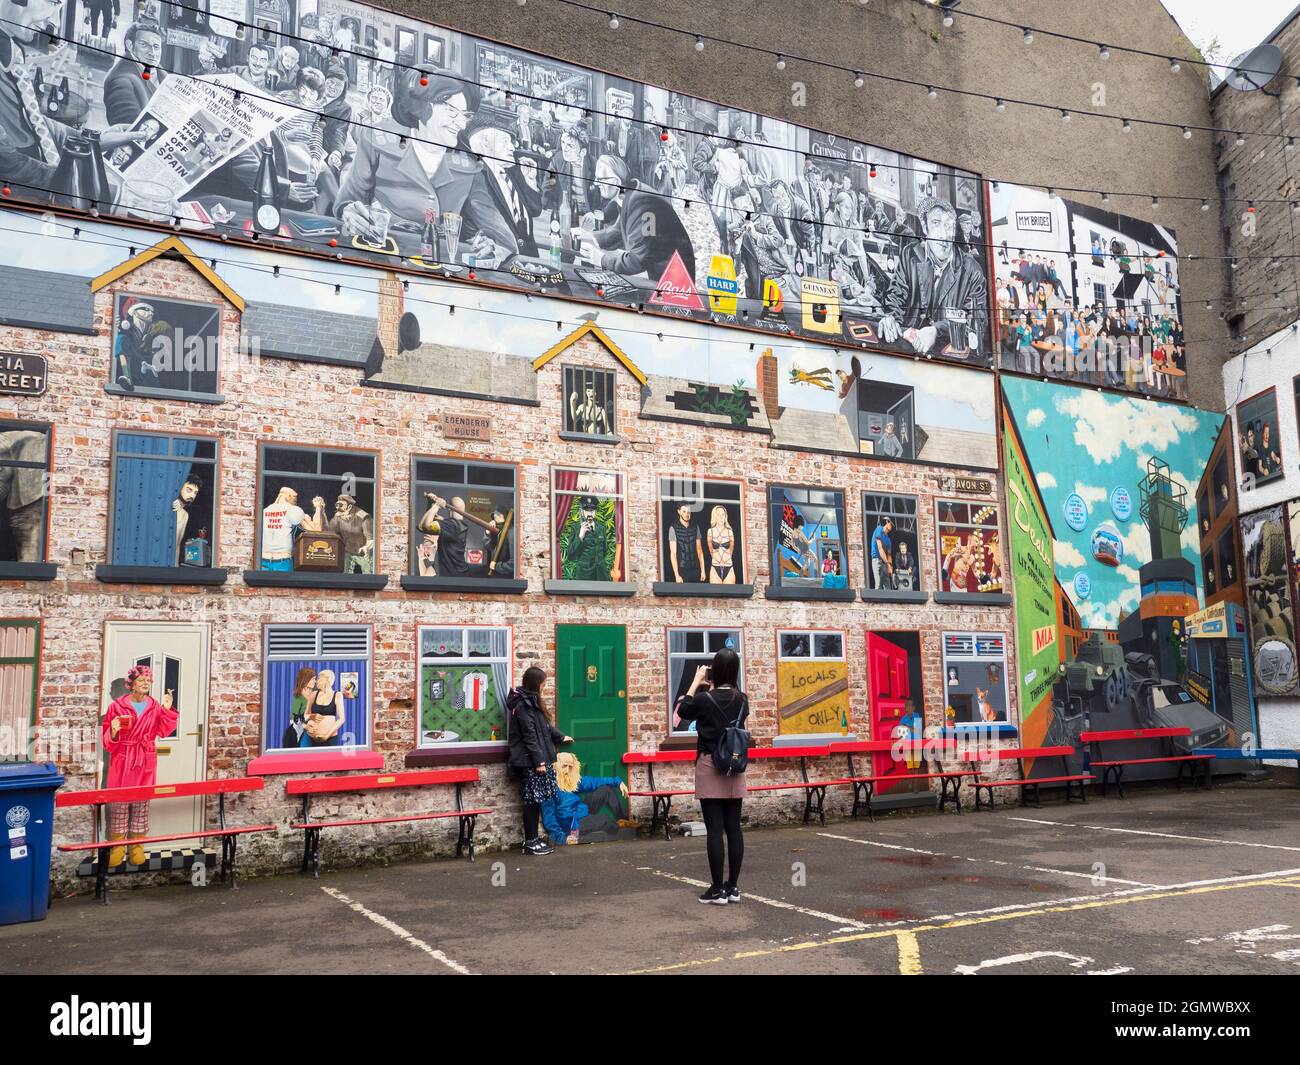 Belfast, Ulster - United Kingdom; Belfast is a city that cannot. seemingly, leave any wall untouched without a splash of colour. The graffiti, especia Stock Photo